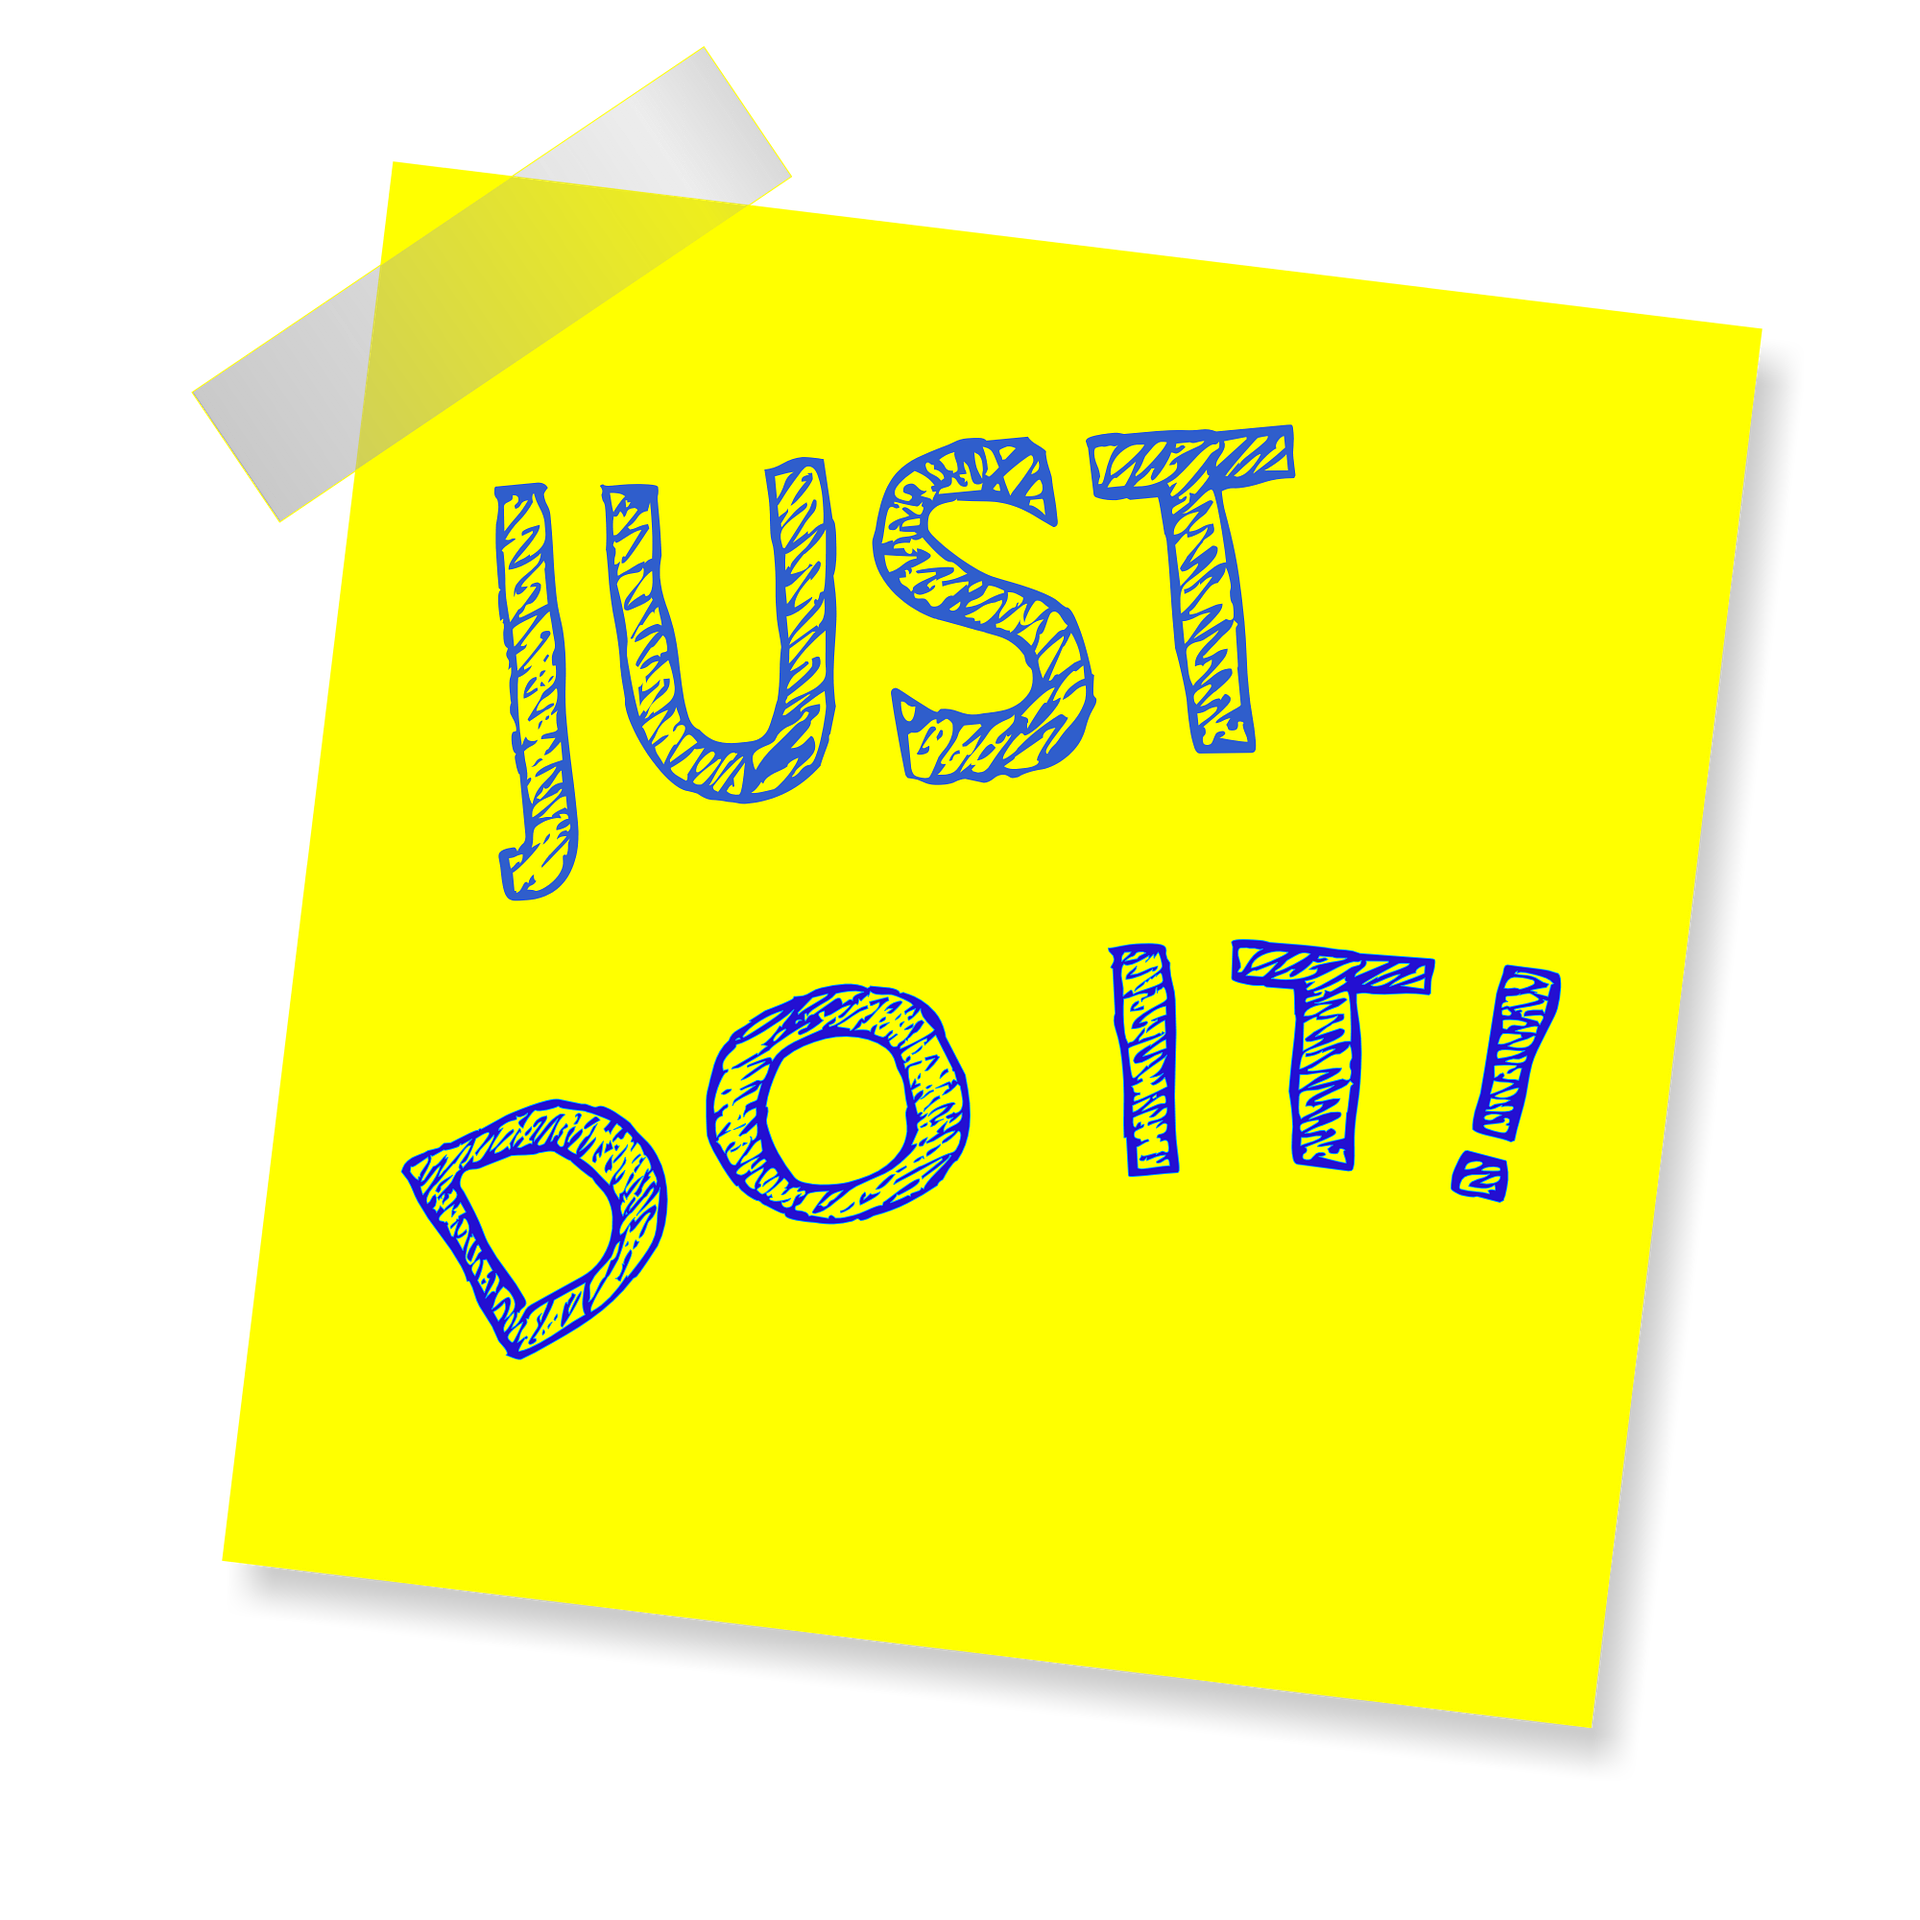 "Just do it" written on a yellow post it with tape on the top right corner